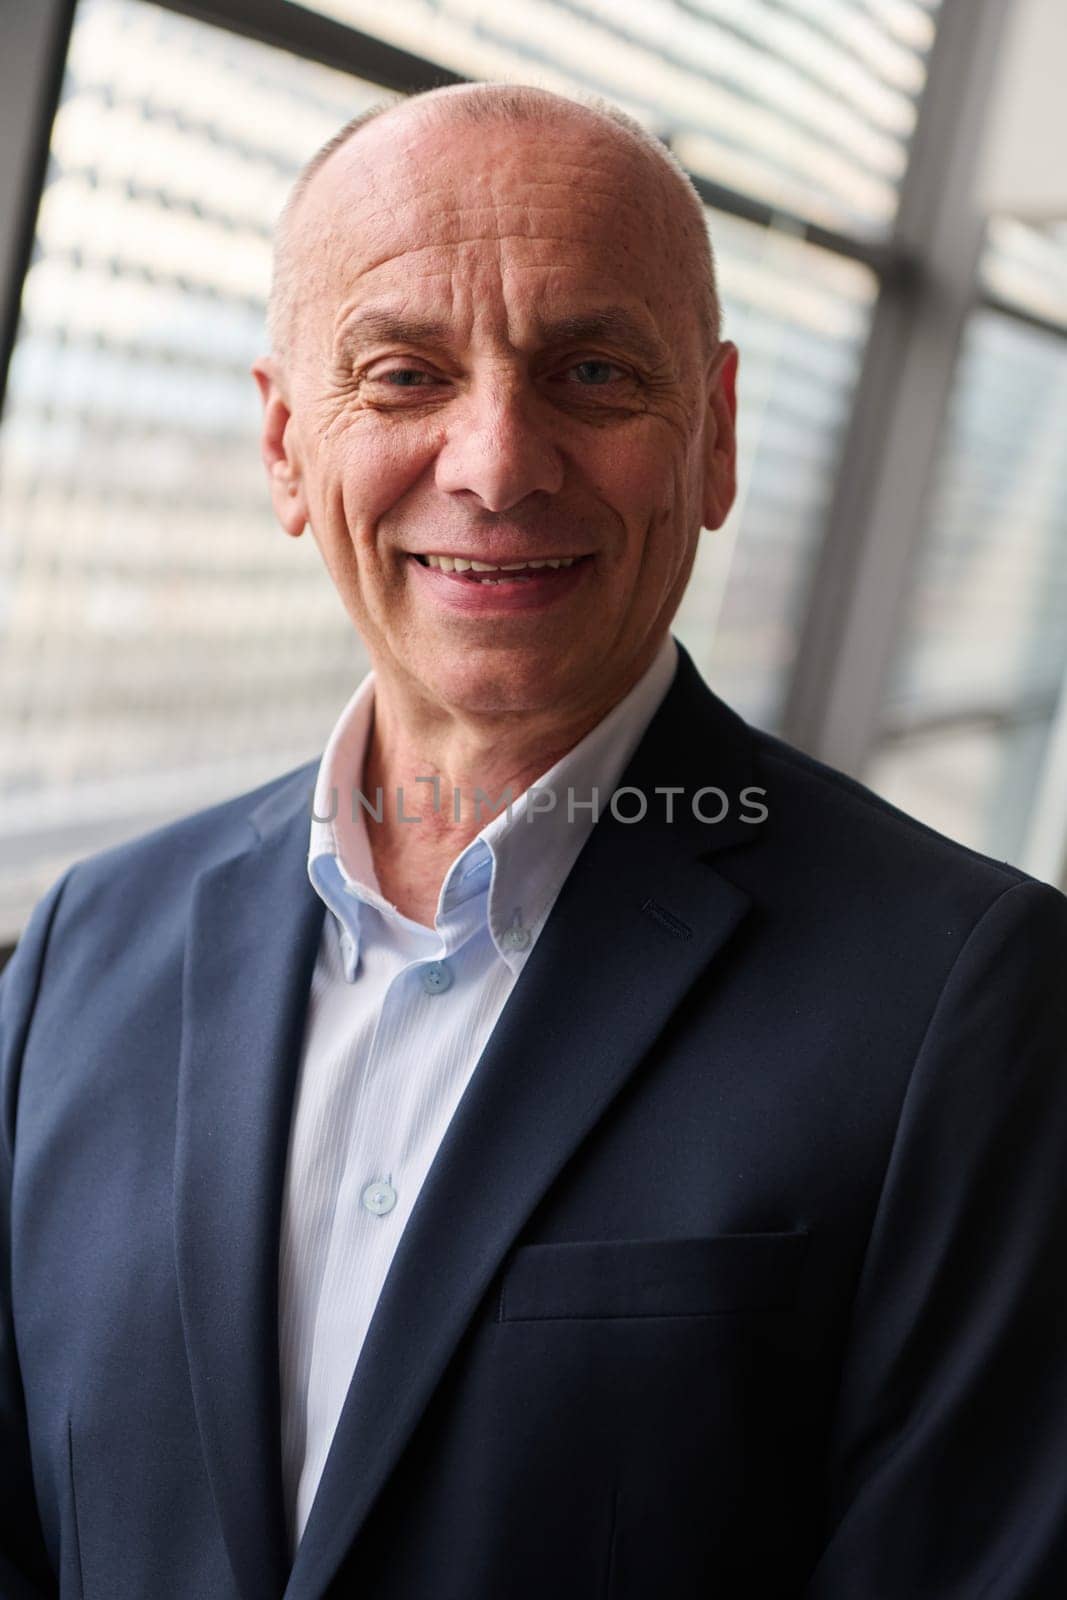 Portrait of an Experienced Businessman in Modern Conference Setting by dotshock